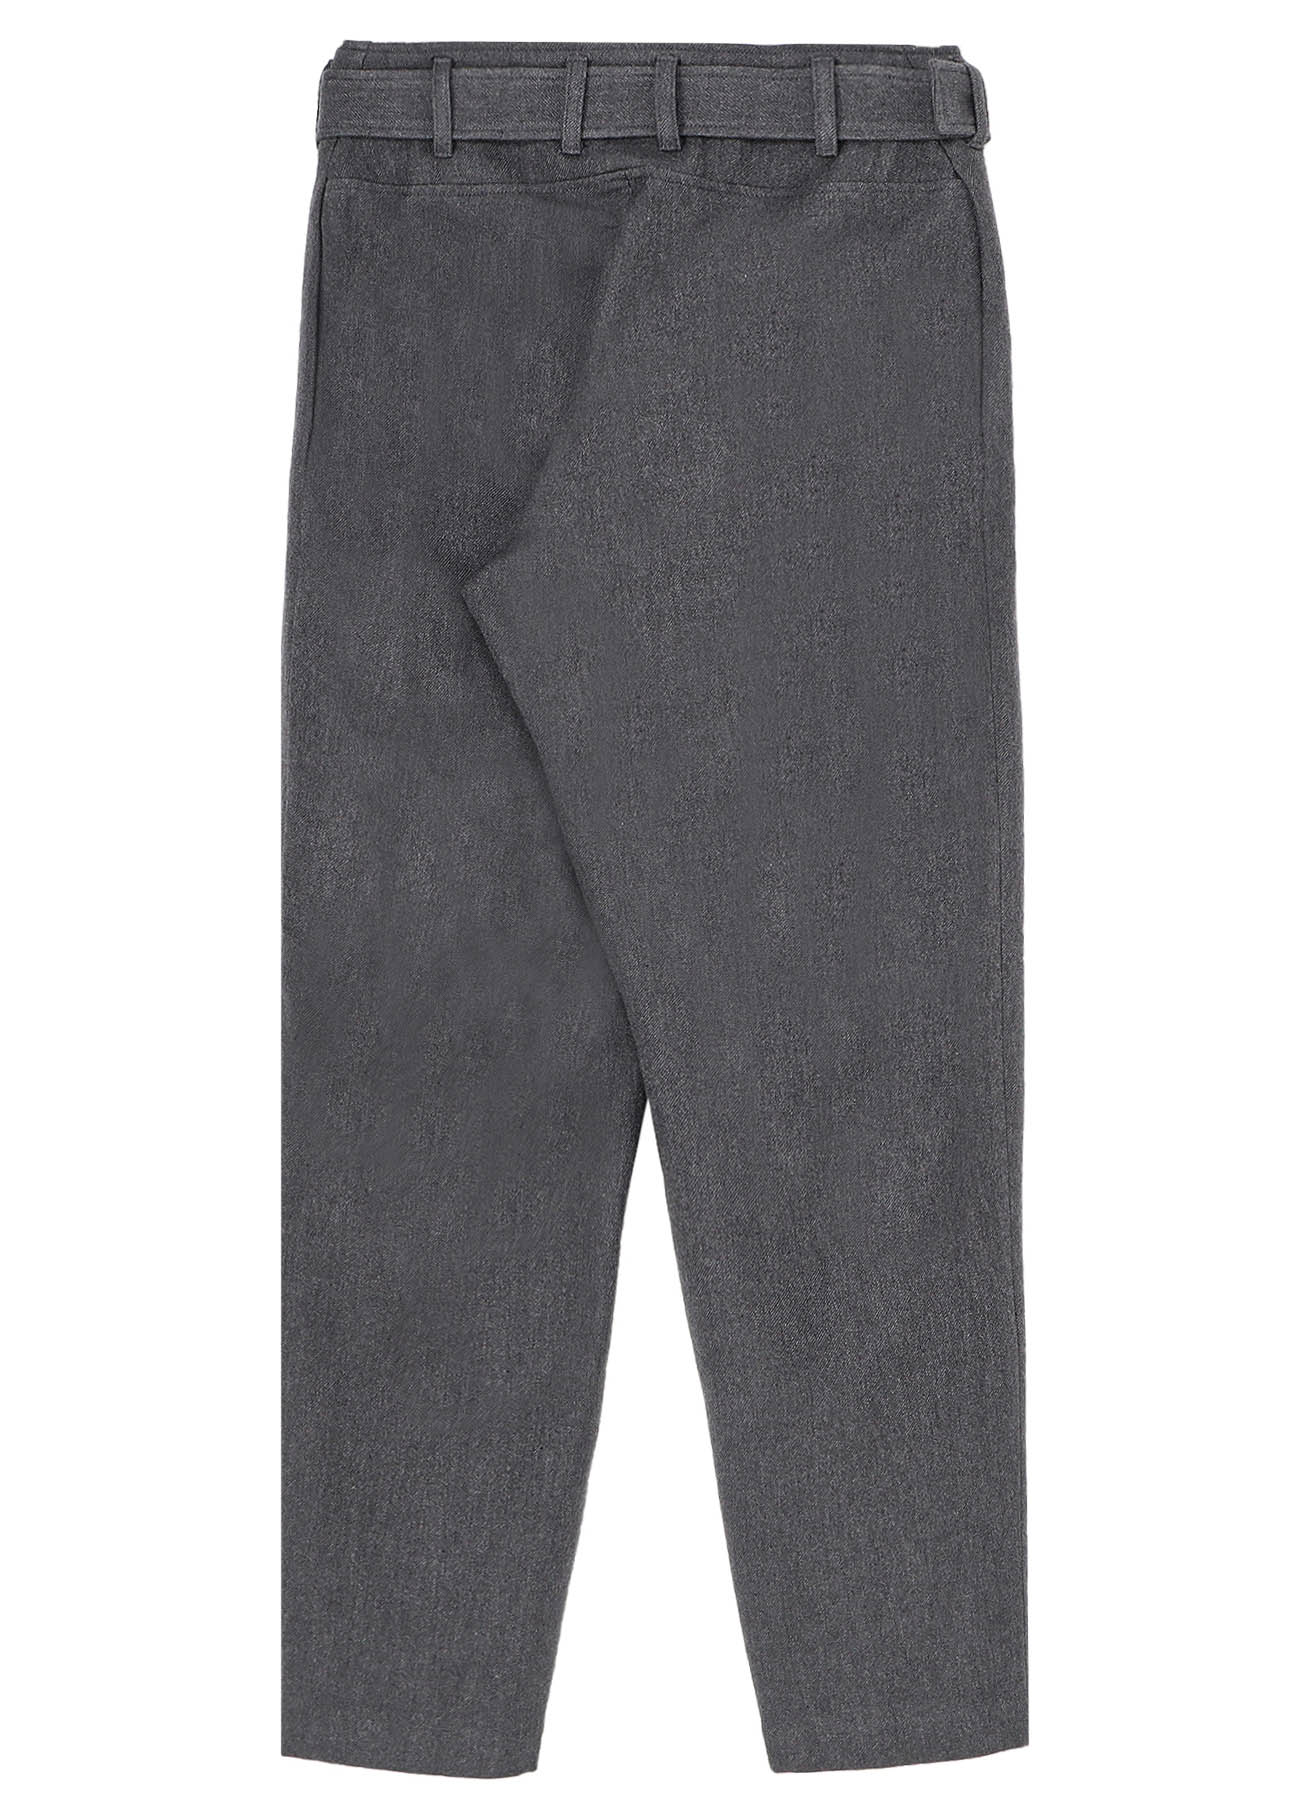 W/C TWILL WASHER BELTED PANTS